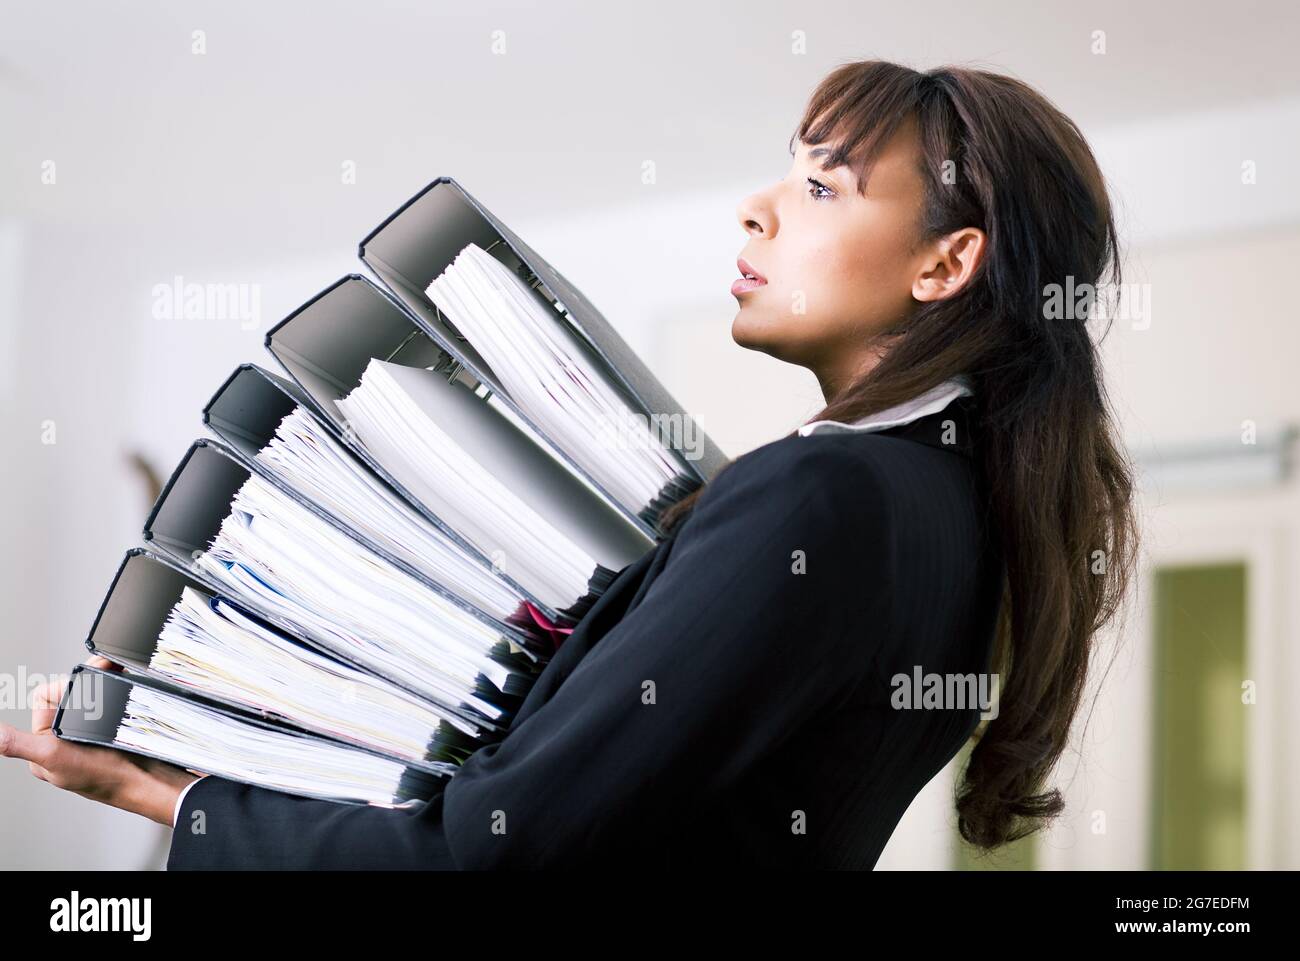 Female office worker carrying a stack of files Stock Photo